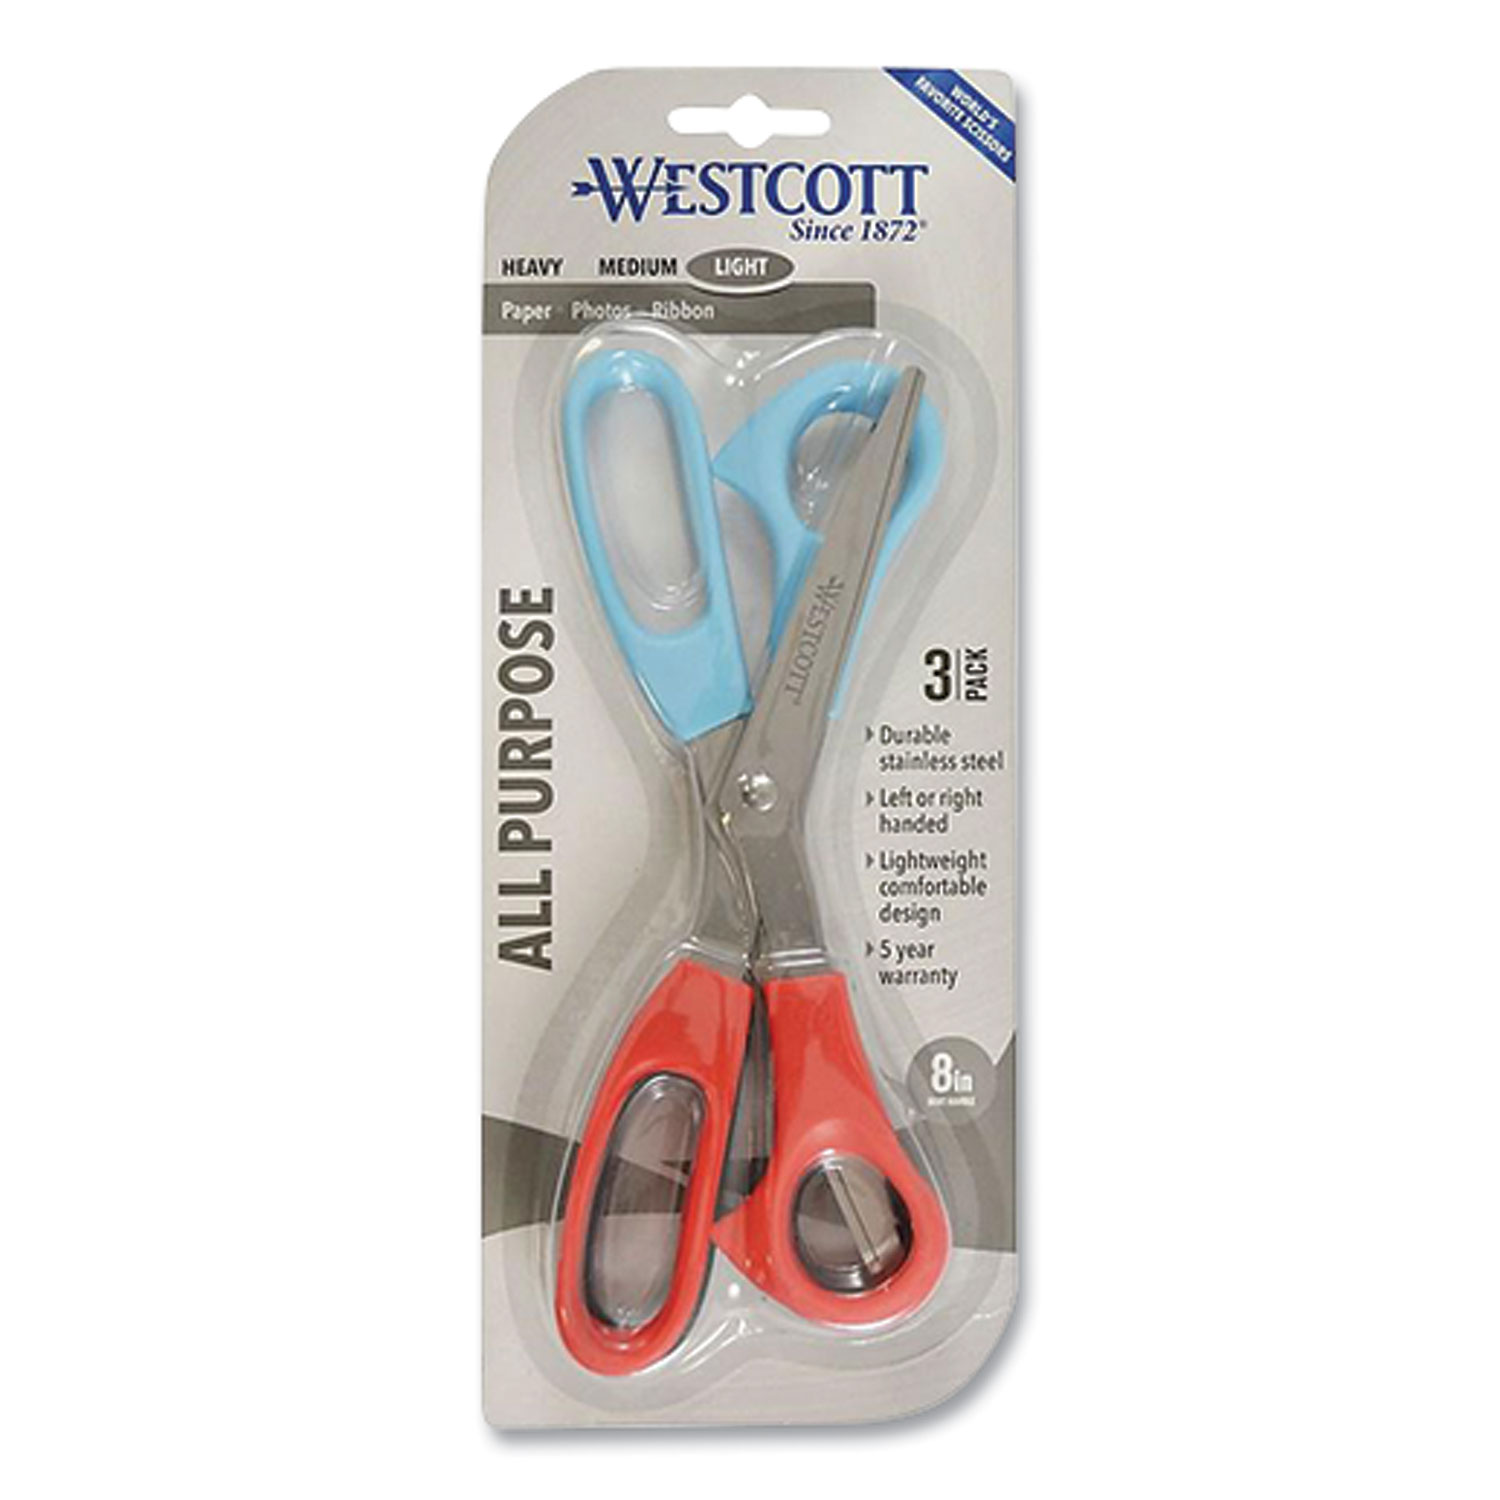 Westcott® All Purpose Value Stainless Steel Scissors Three Pack, 8 Long, 3 Cut Length, Assorted Color Offset Handles, 3/Pack